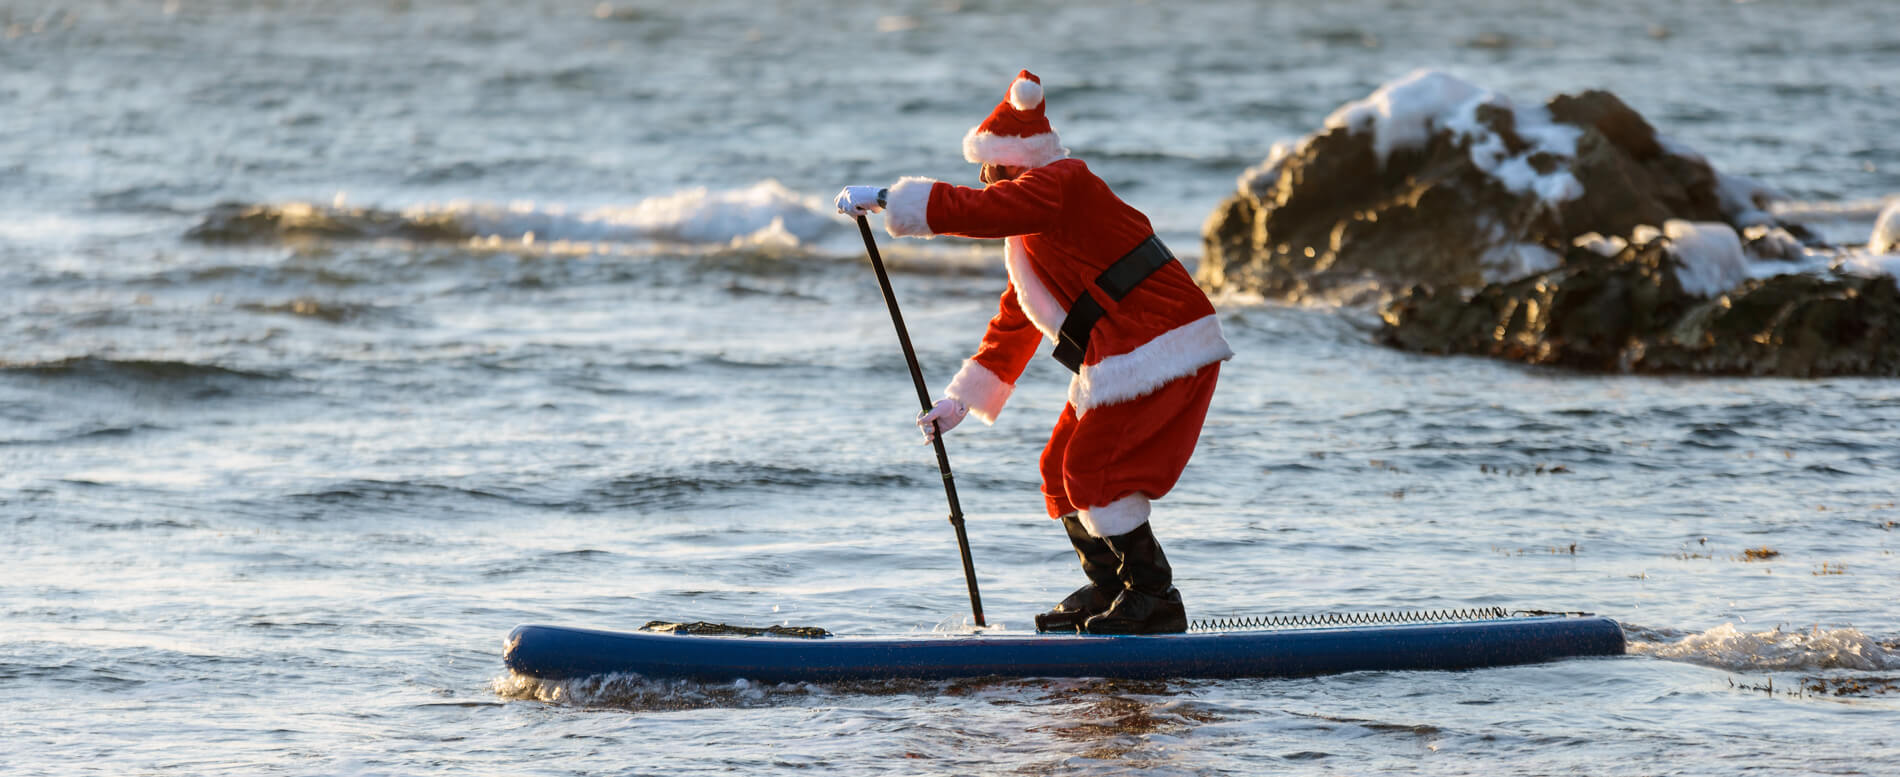 Ultimate sup holiday gift guide for paddle boarders